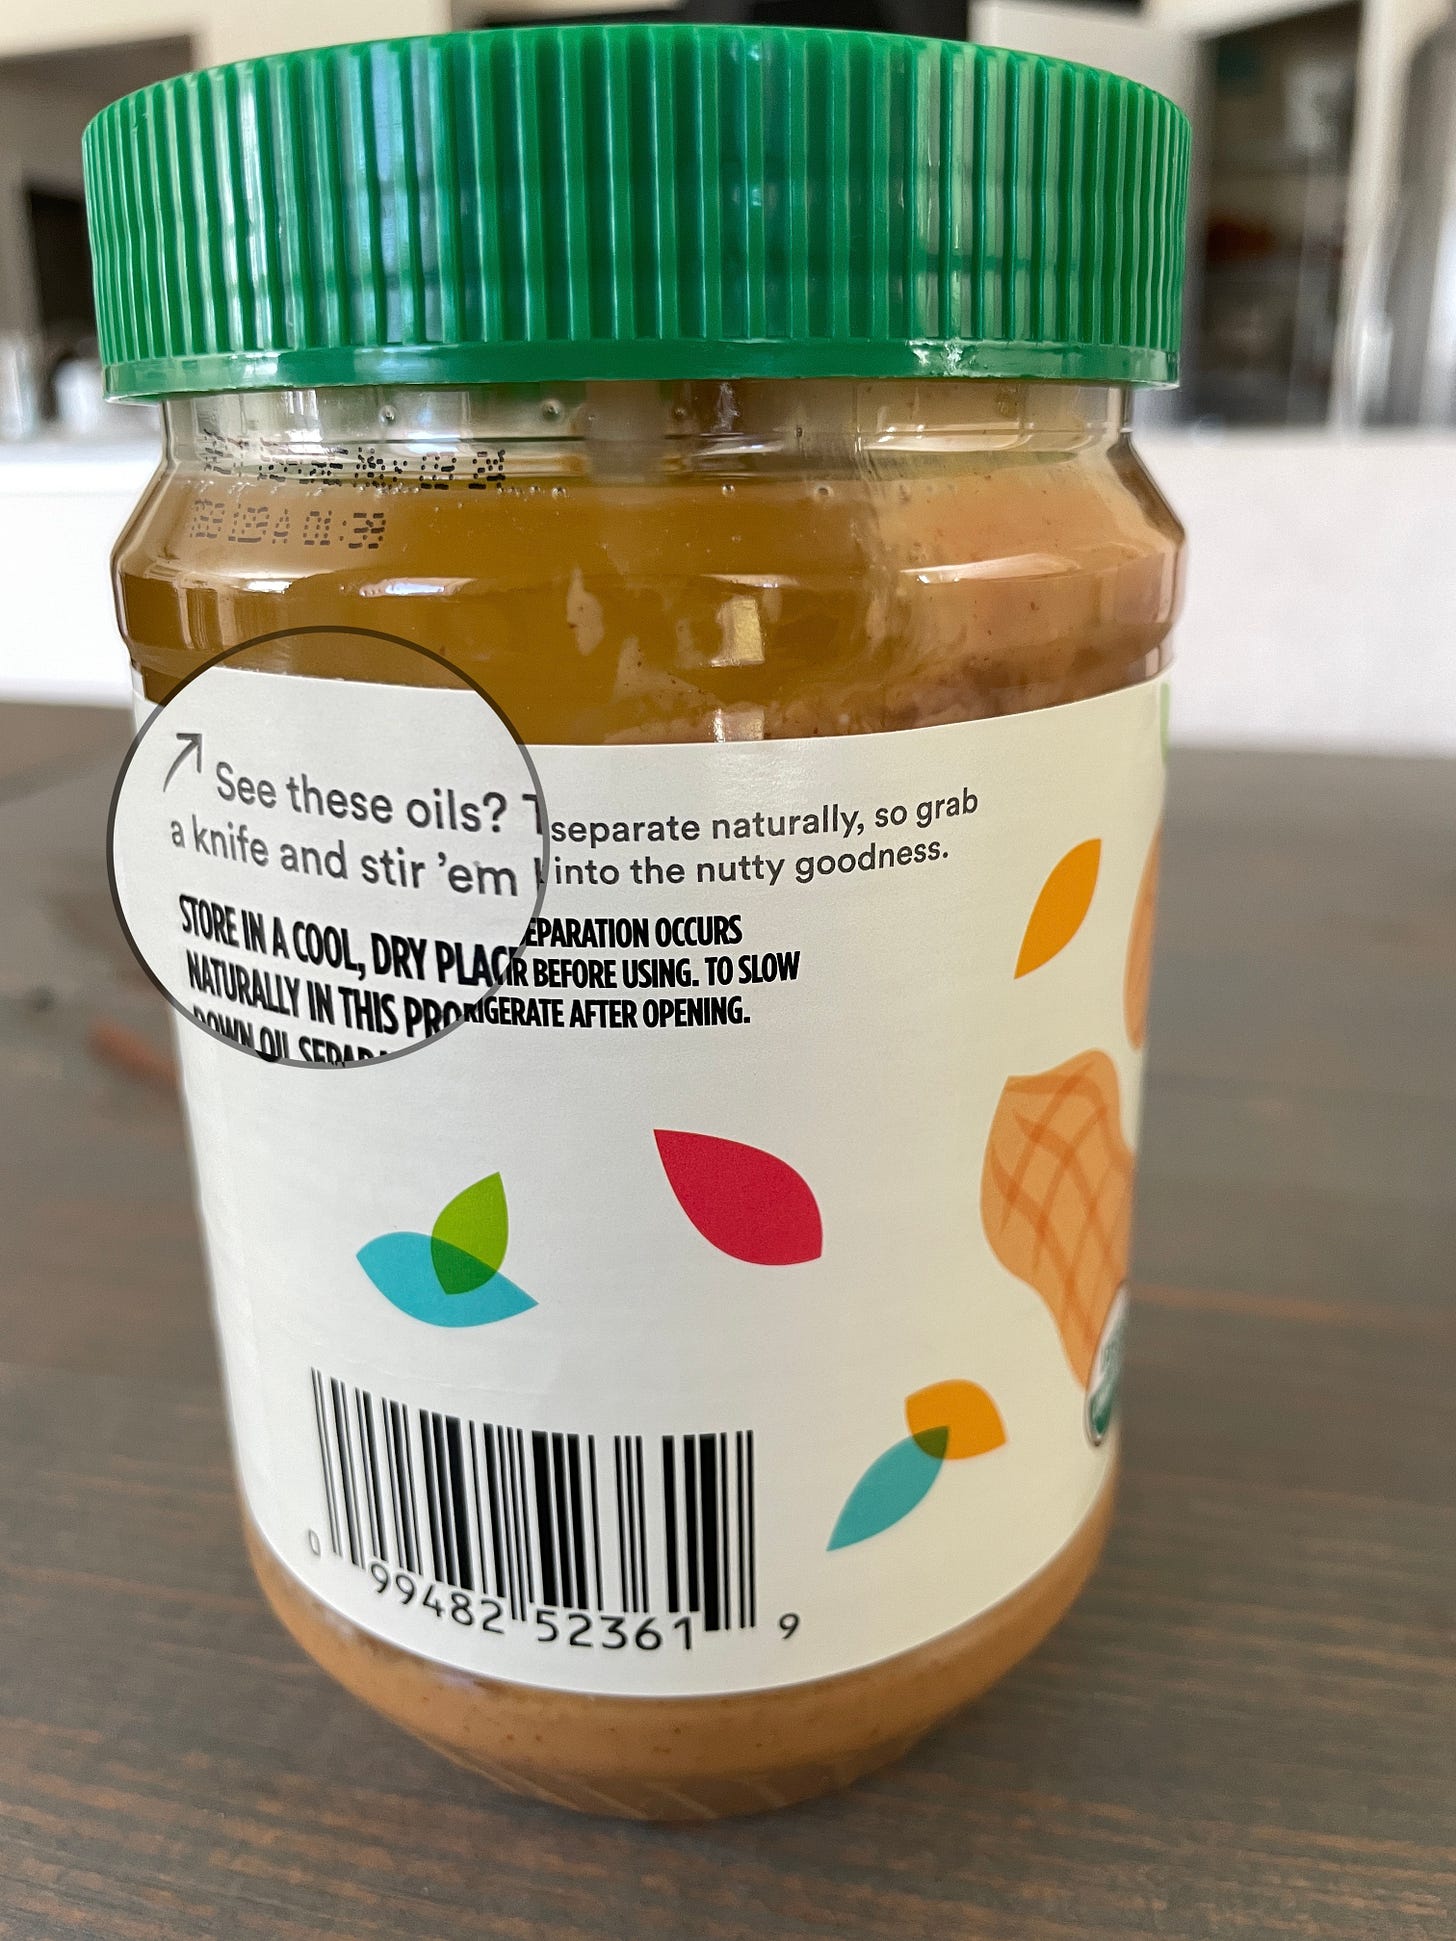 Peanut butter container highlighting the oil separation